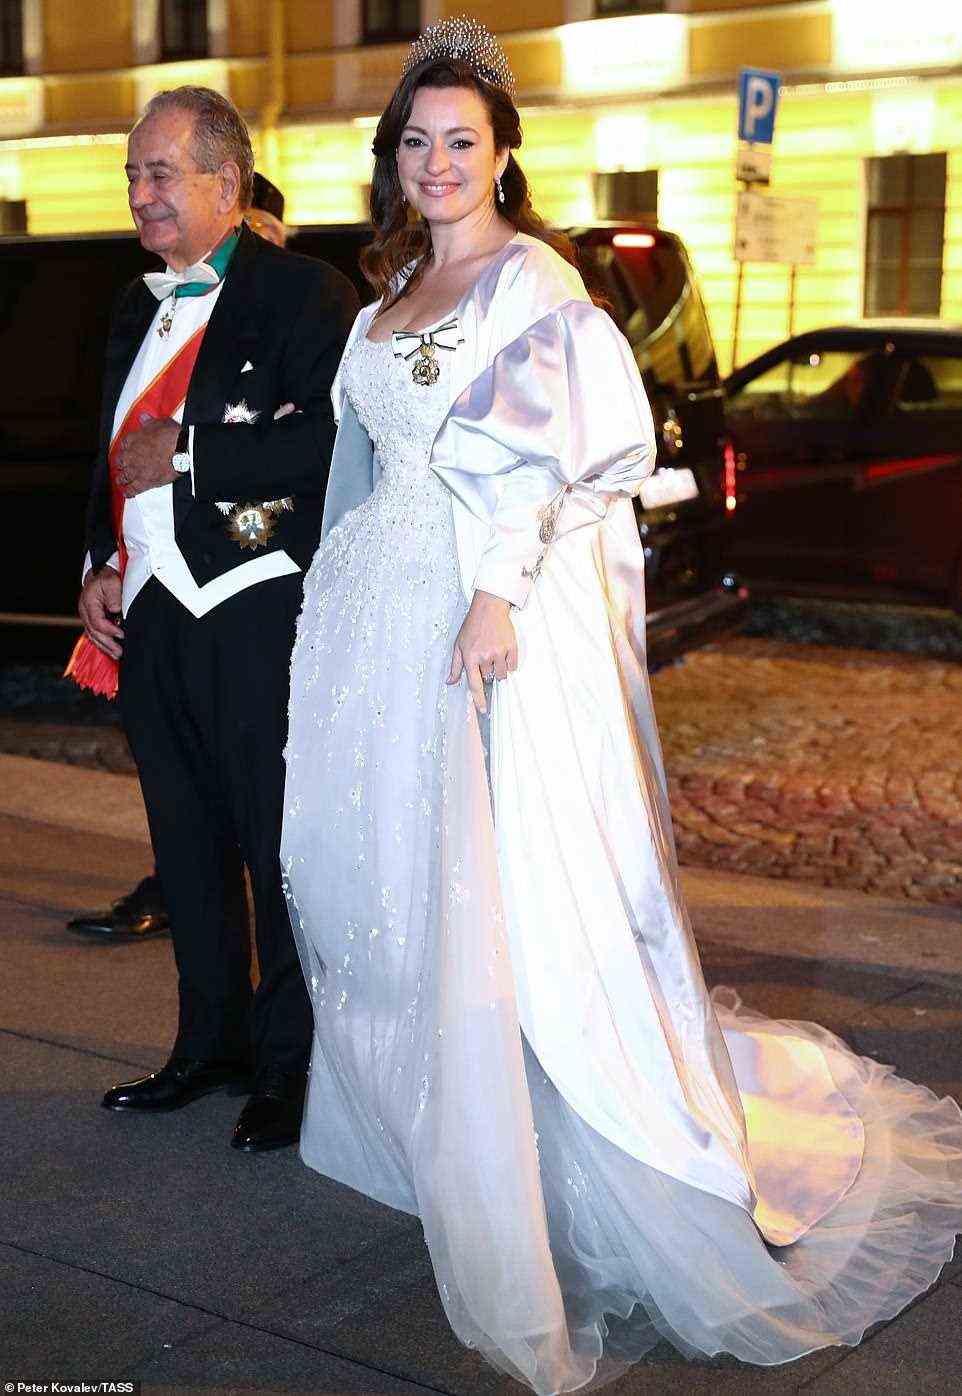 Rebecca (Victoria) Bettarini of Italy is accompanied by her father, diplomat Roberto Bettarini prior to a reception at the Russian Museum of Ethnography marking her wedding